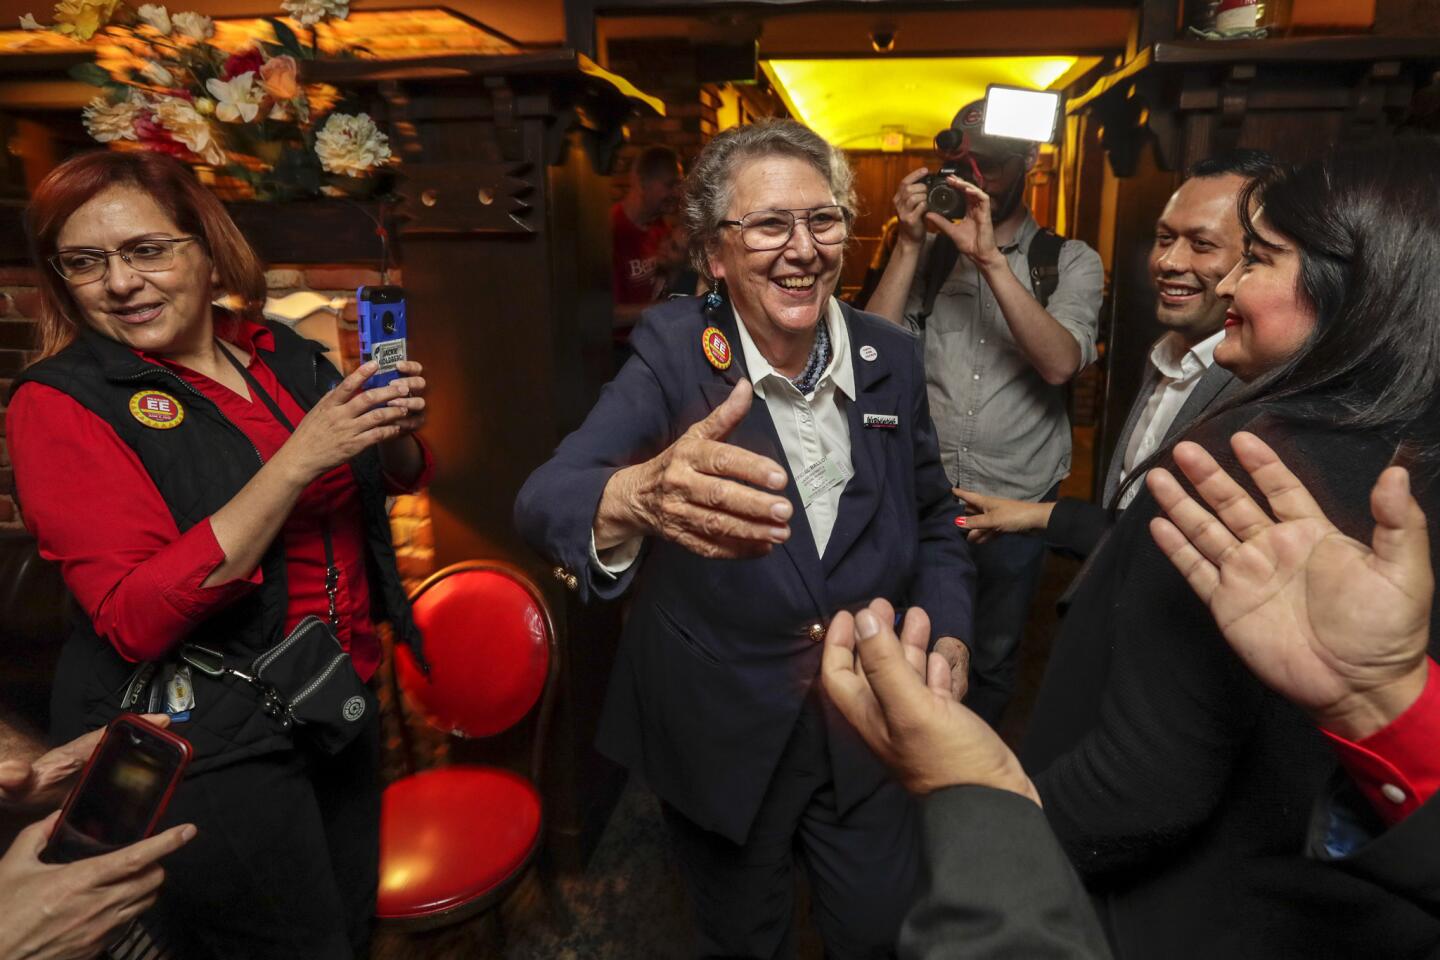 Supporters and campaign workers celebrate the apparent LAUSD school board runoff election victory for Jackie Goldberg at Taix French Restaurant.